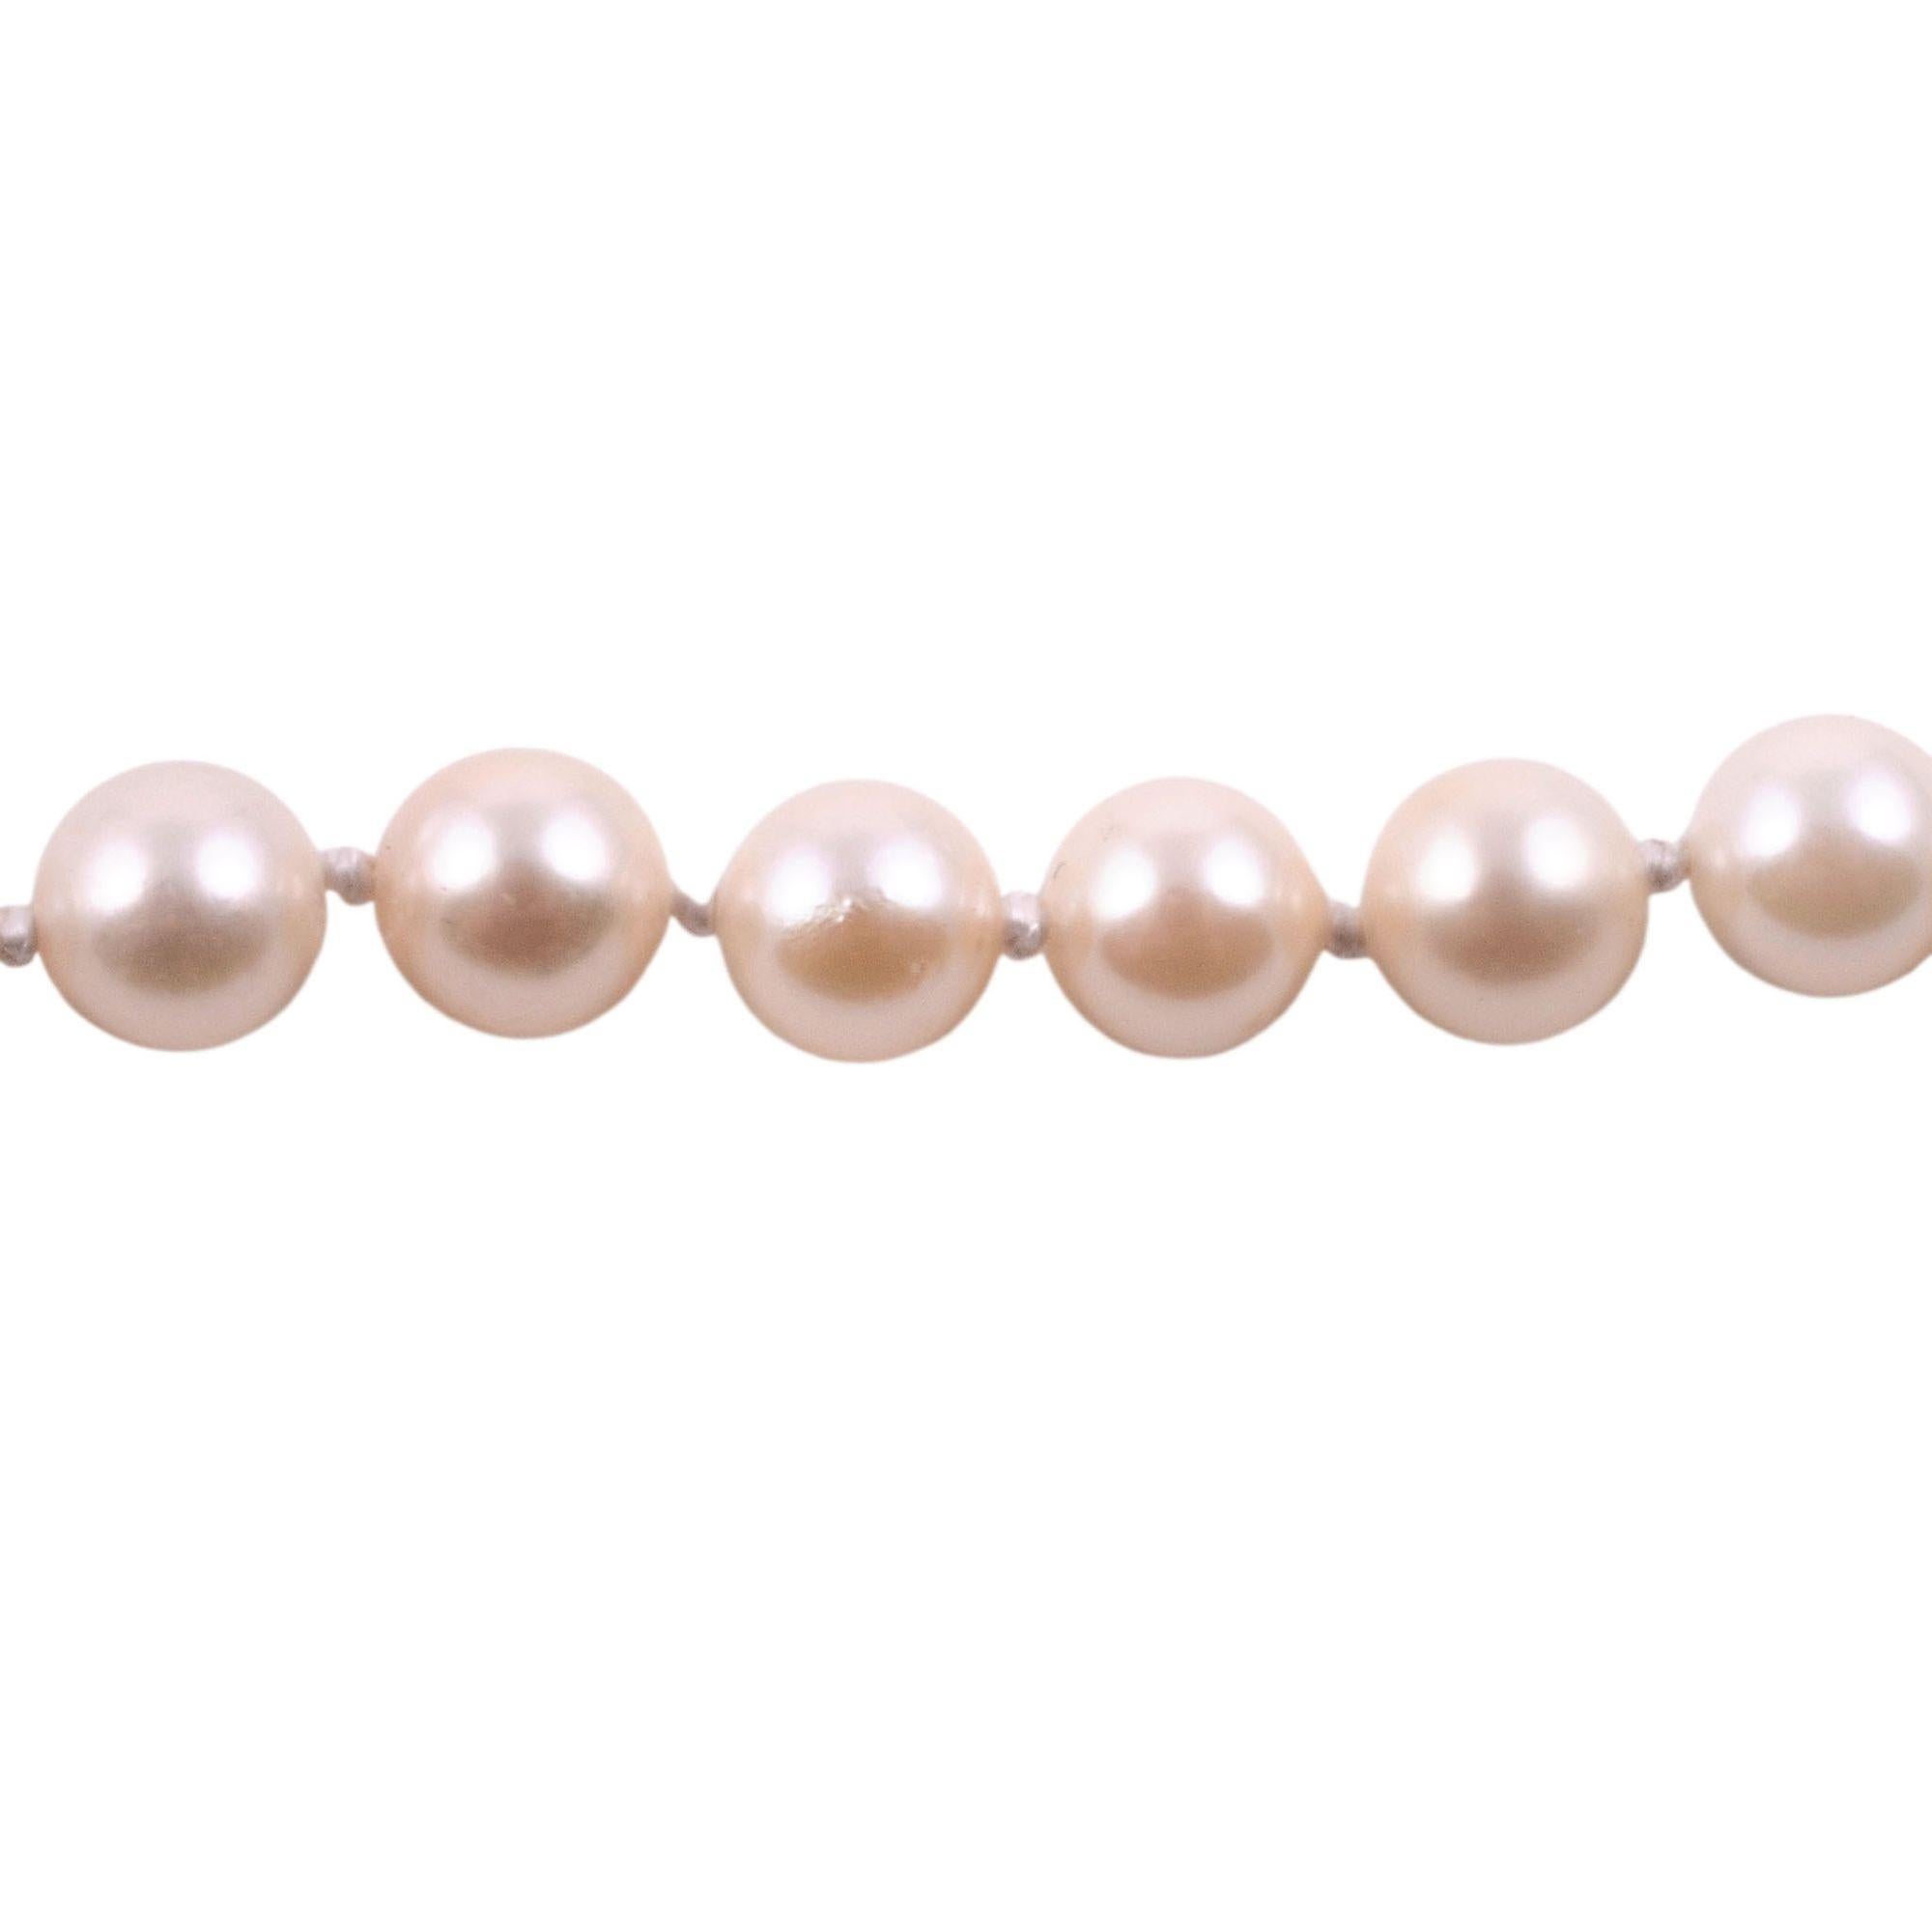 Akoya Pearl Necklace In Good Condition For Sale In Solvang, CA